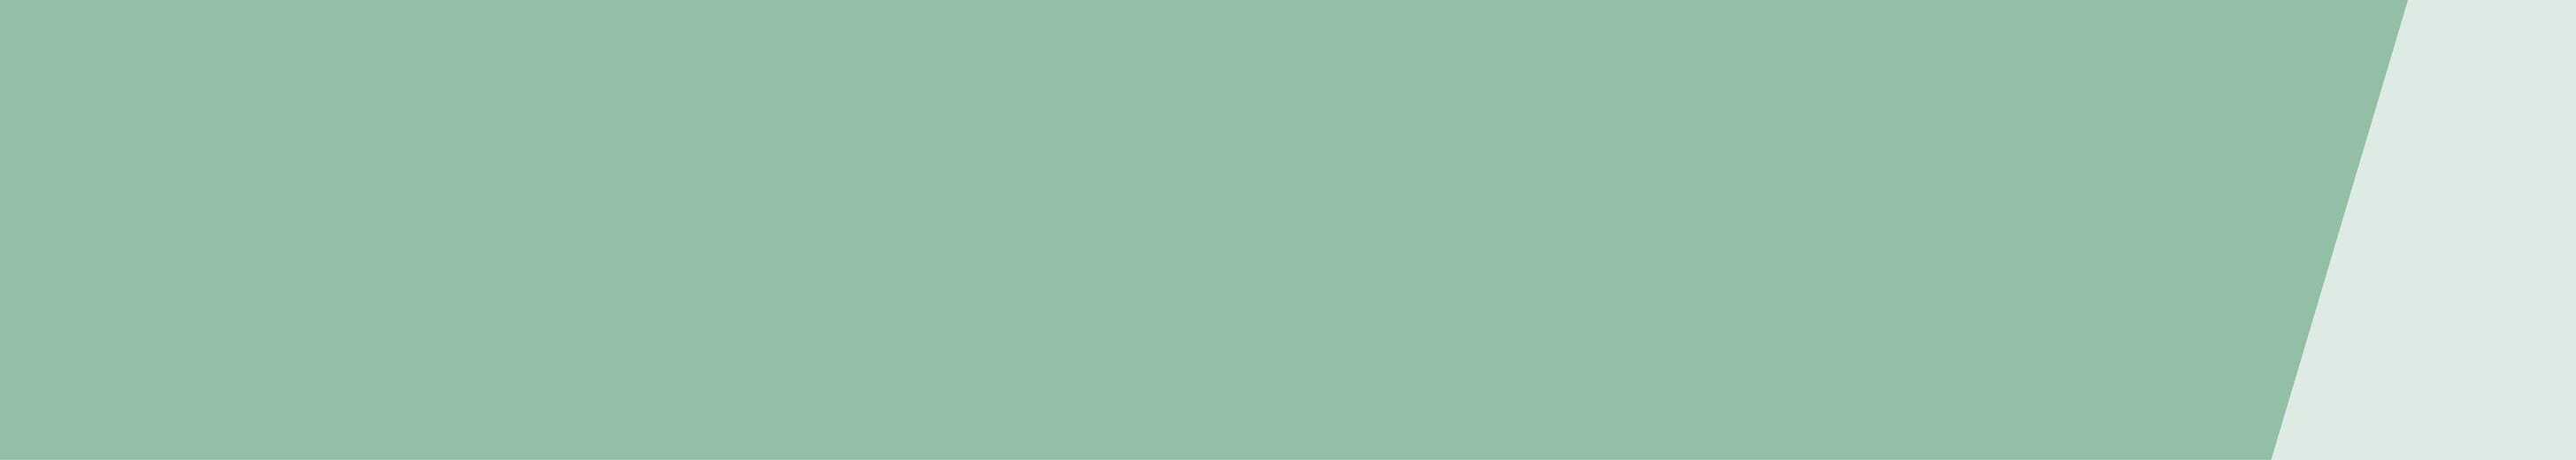 Muted green coloured rectangle